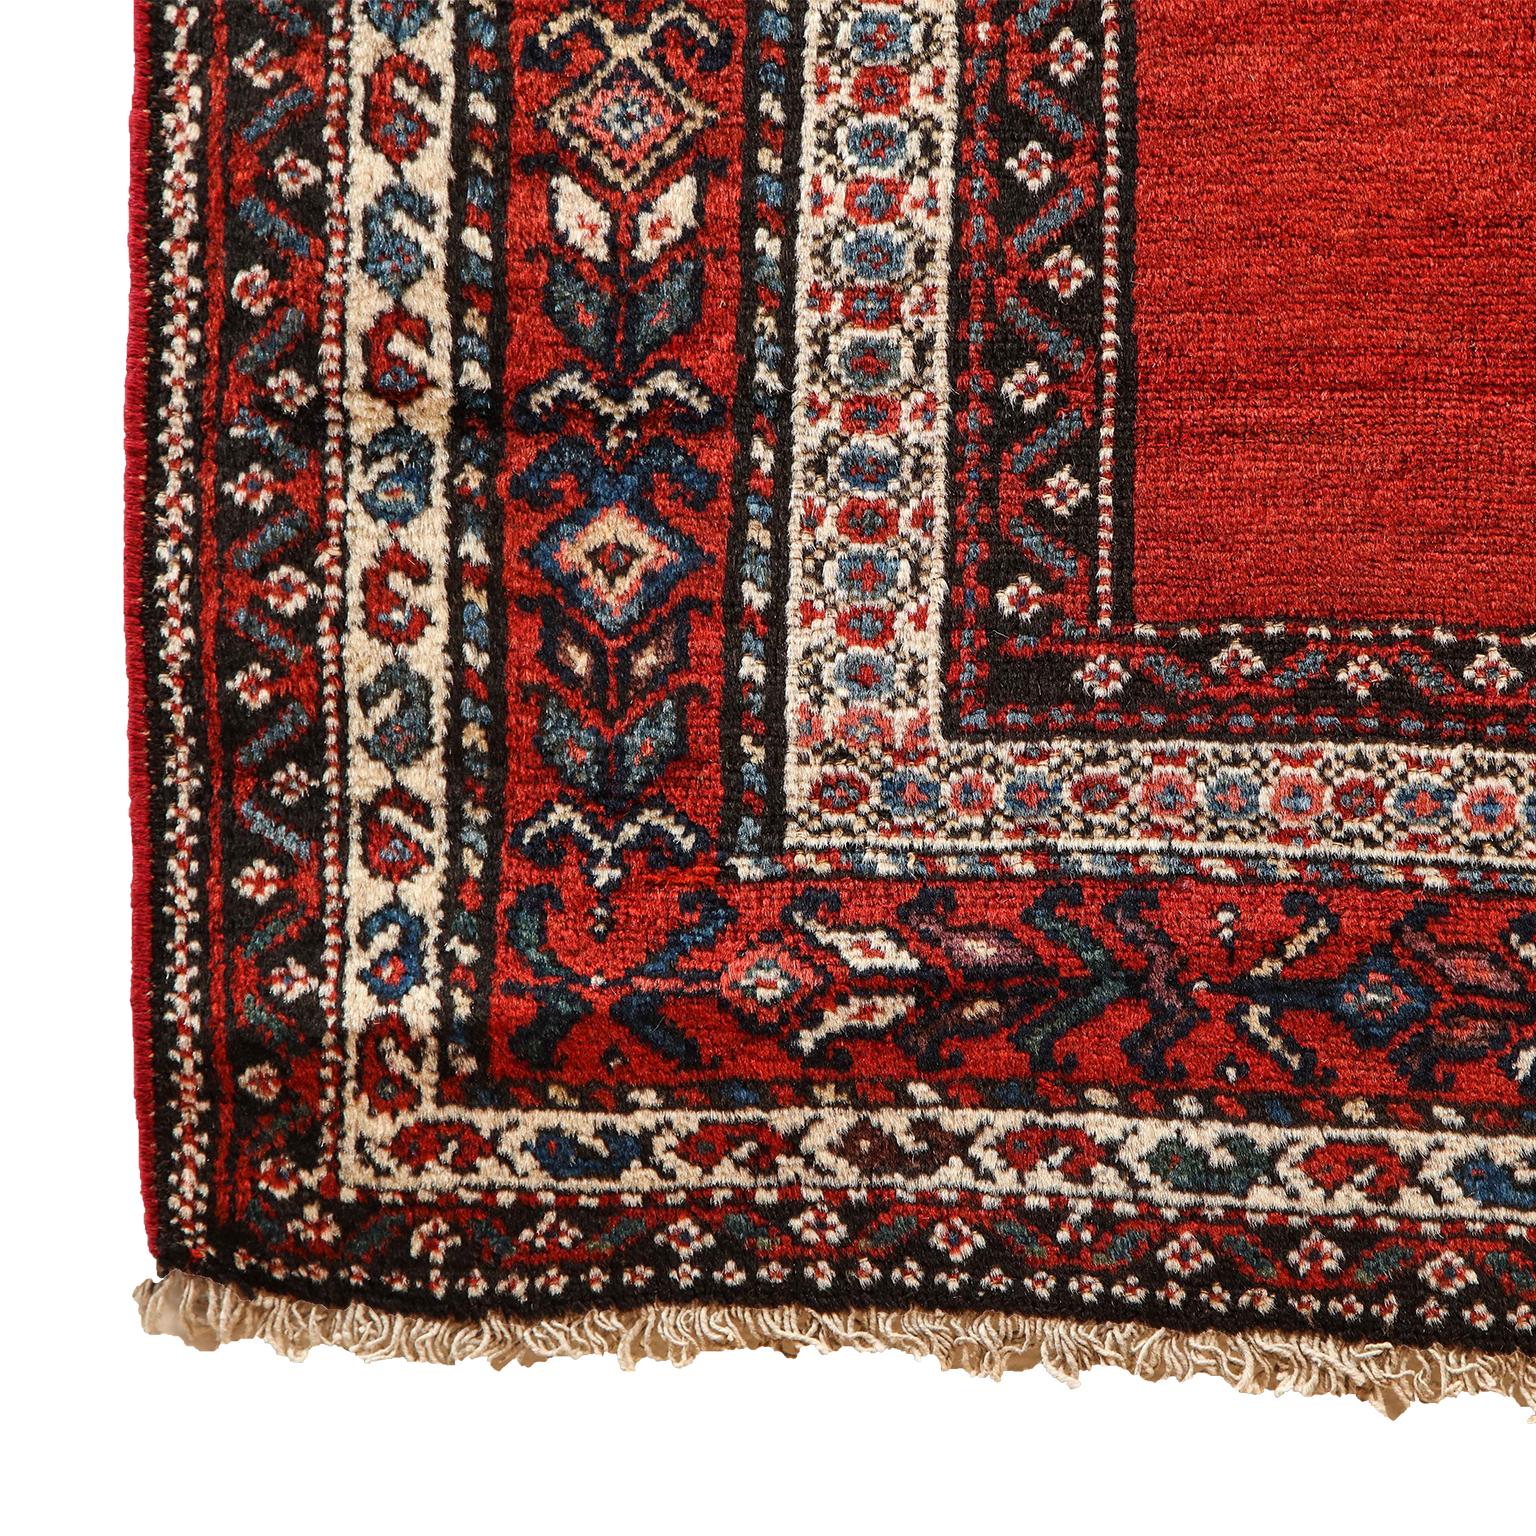 Wool Antique 1900s Persian Malayer Rug, 4' x 6' For Sale